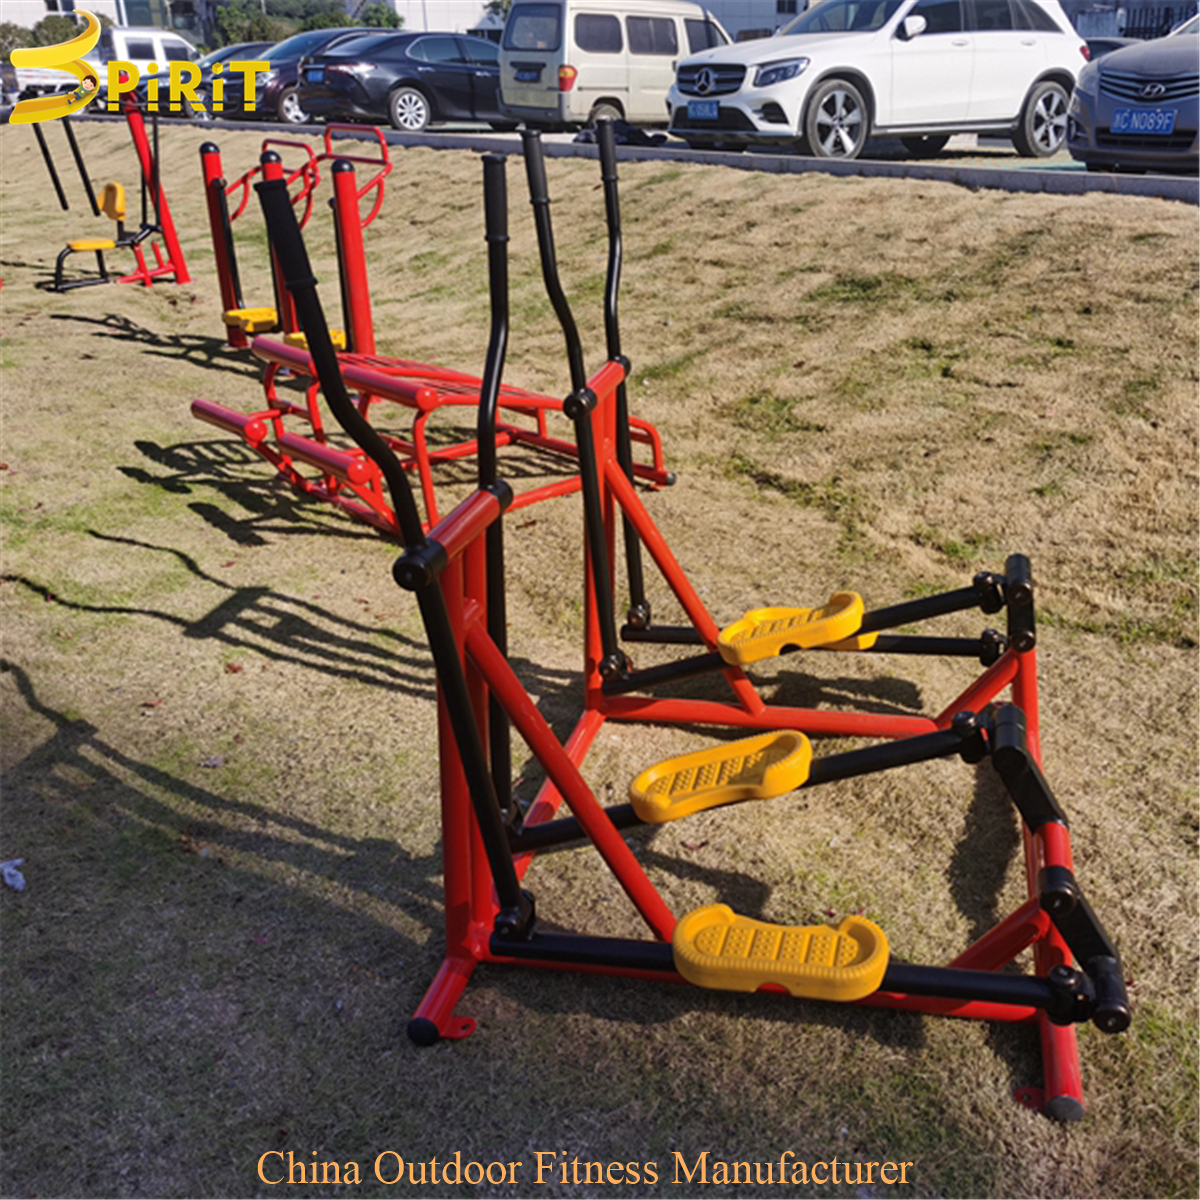 Trusty Outdoor fitness equipment manufacturers for wholesale business in community park.-SPIRIT PLAY,Outdoor Playground, Indoor Playground,Trampoline Park,Outdoor Fitness,Inflatable,Soft Playground,Ninja Warrior,Trampoline Park,Playground Structure,Play Structure,Outdoor Fitness,Water Park,Play System,Freestanding,Interactive,independente ,Inklusibo, Park, Pagsaka sa Bungbong, Dula sa Bata